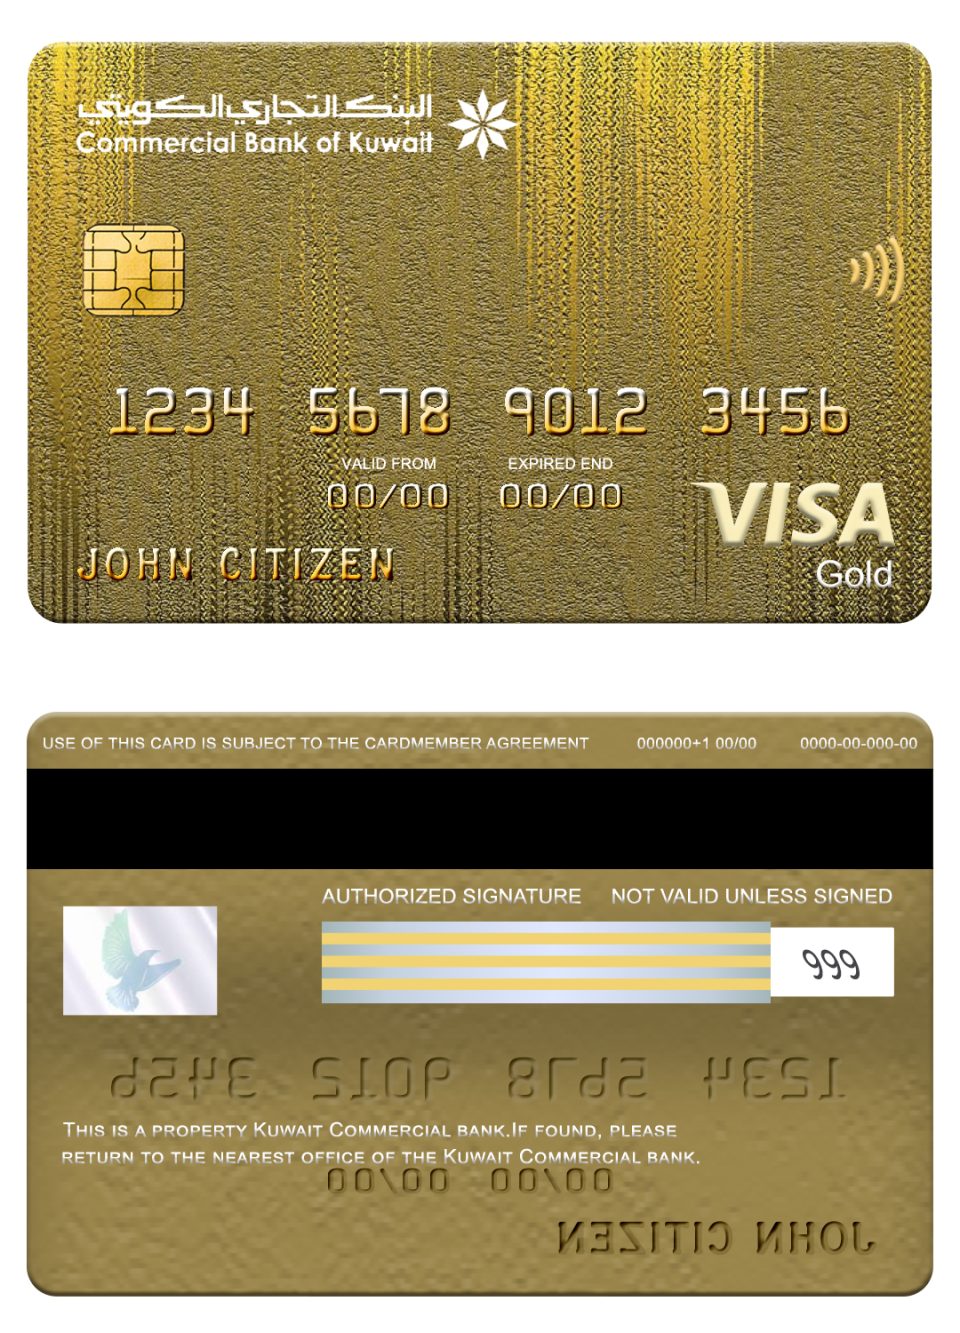 Fillable Kuwait Commercial bank visa gold card Templates | Layer-Based PSD